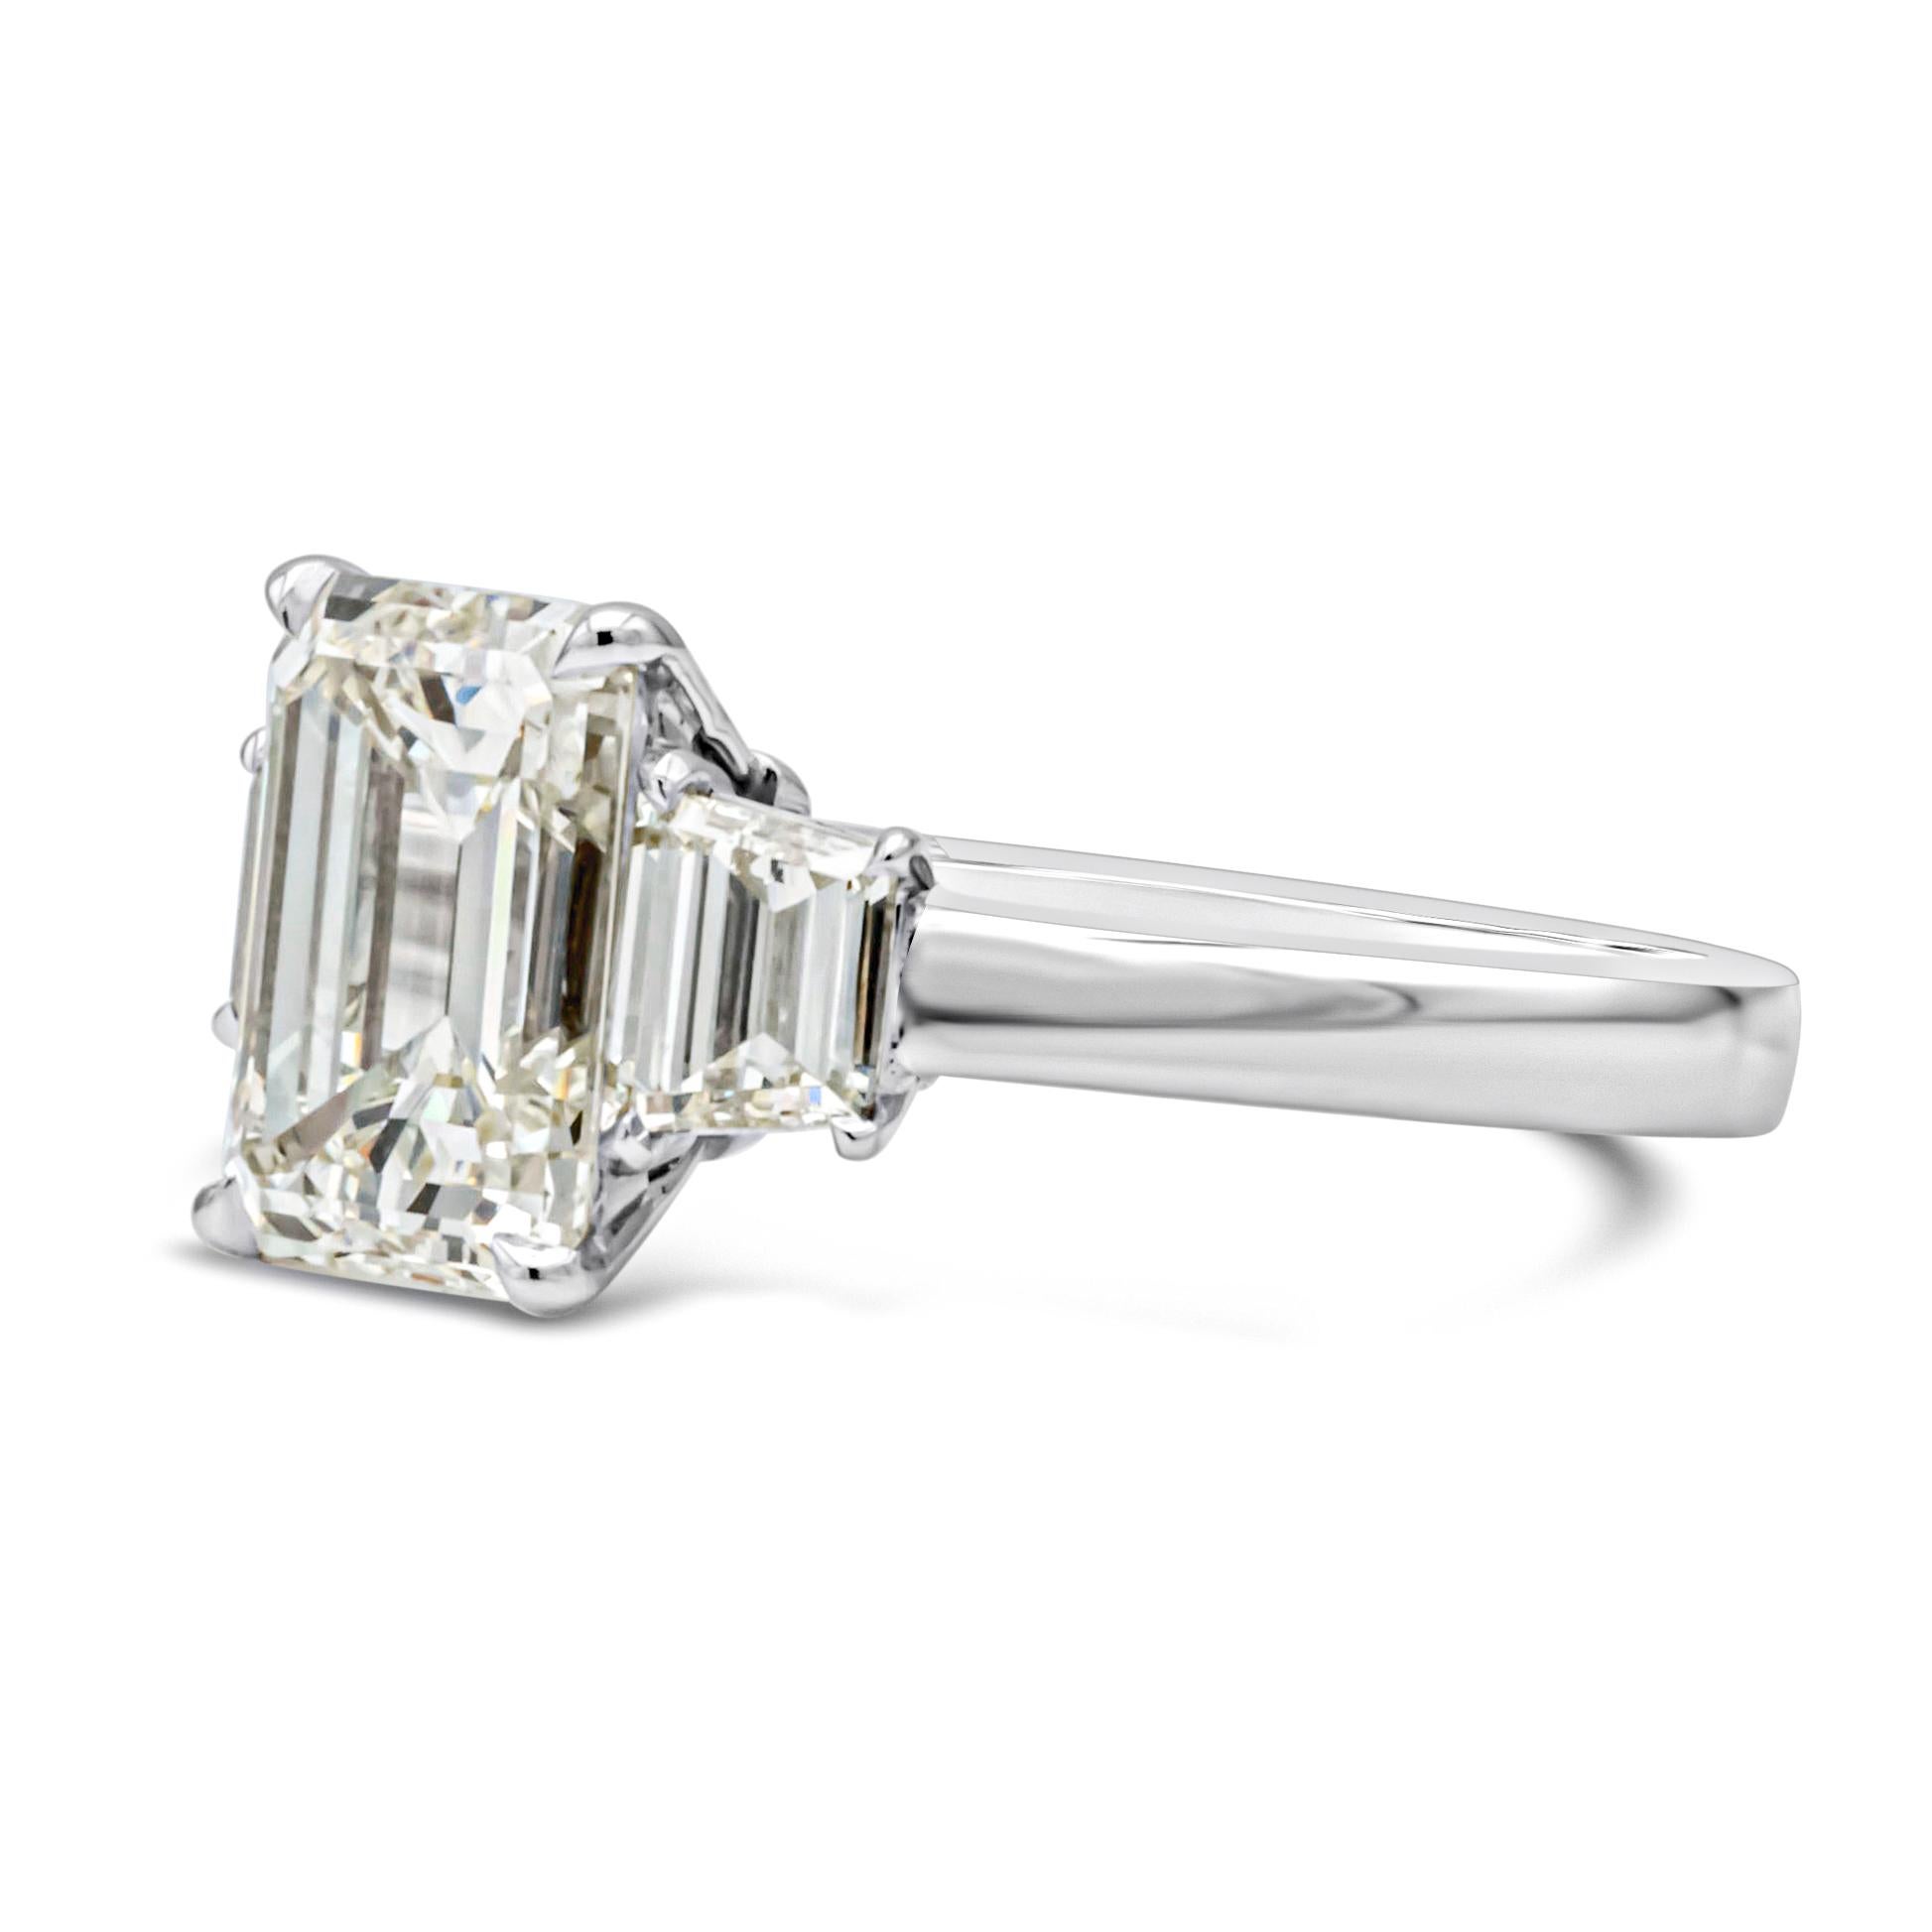 This magnificent and classy three stone engagement ring showcases 2.96 carats emerald cut center diamond that GIA certified as M Color, VS1 in Clarity. Two perfectly matched trapazoid cut diamonds elegantly flank the center diamond weighing 0.70